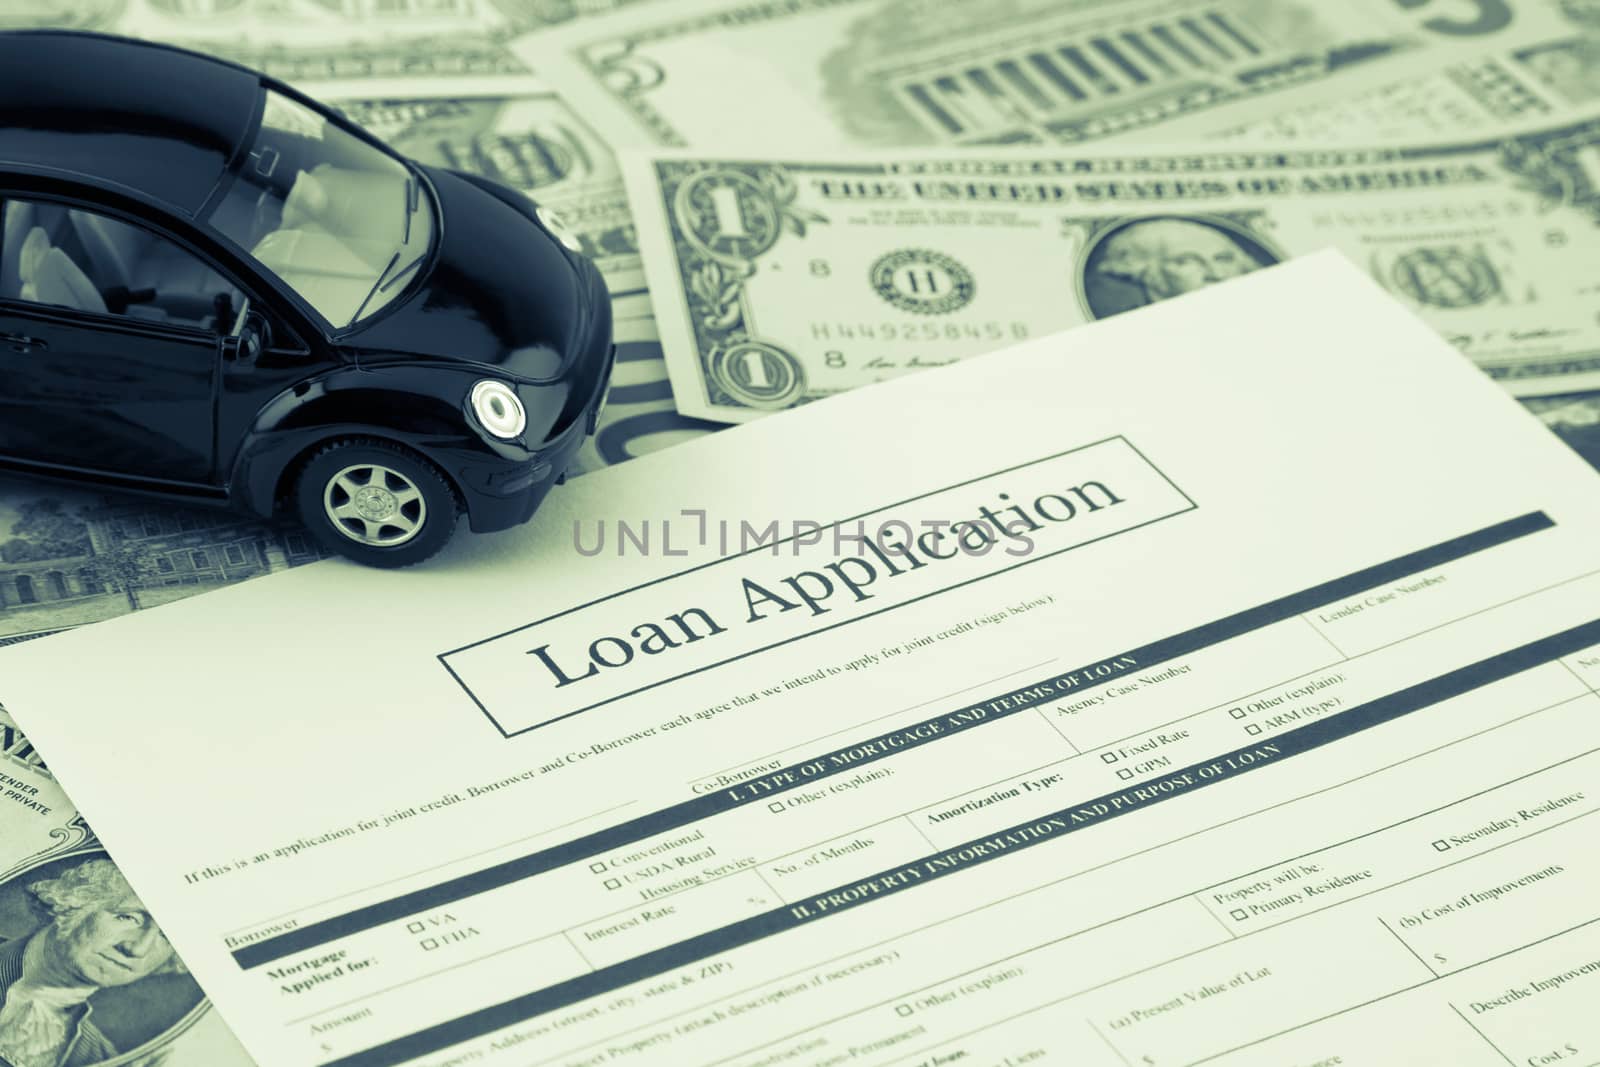 Loan application form with car and money, Sepia toned by vinnstock